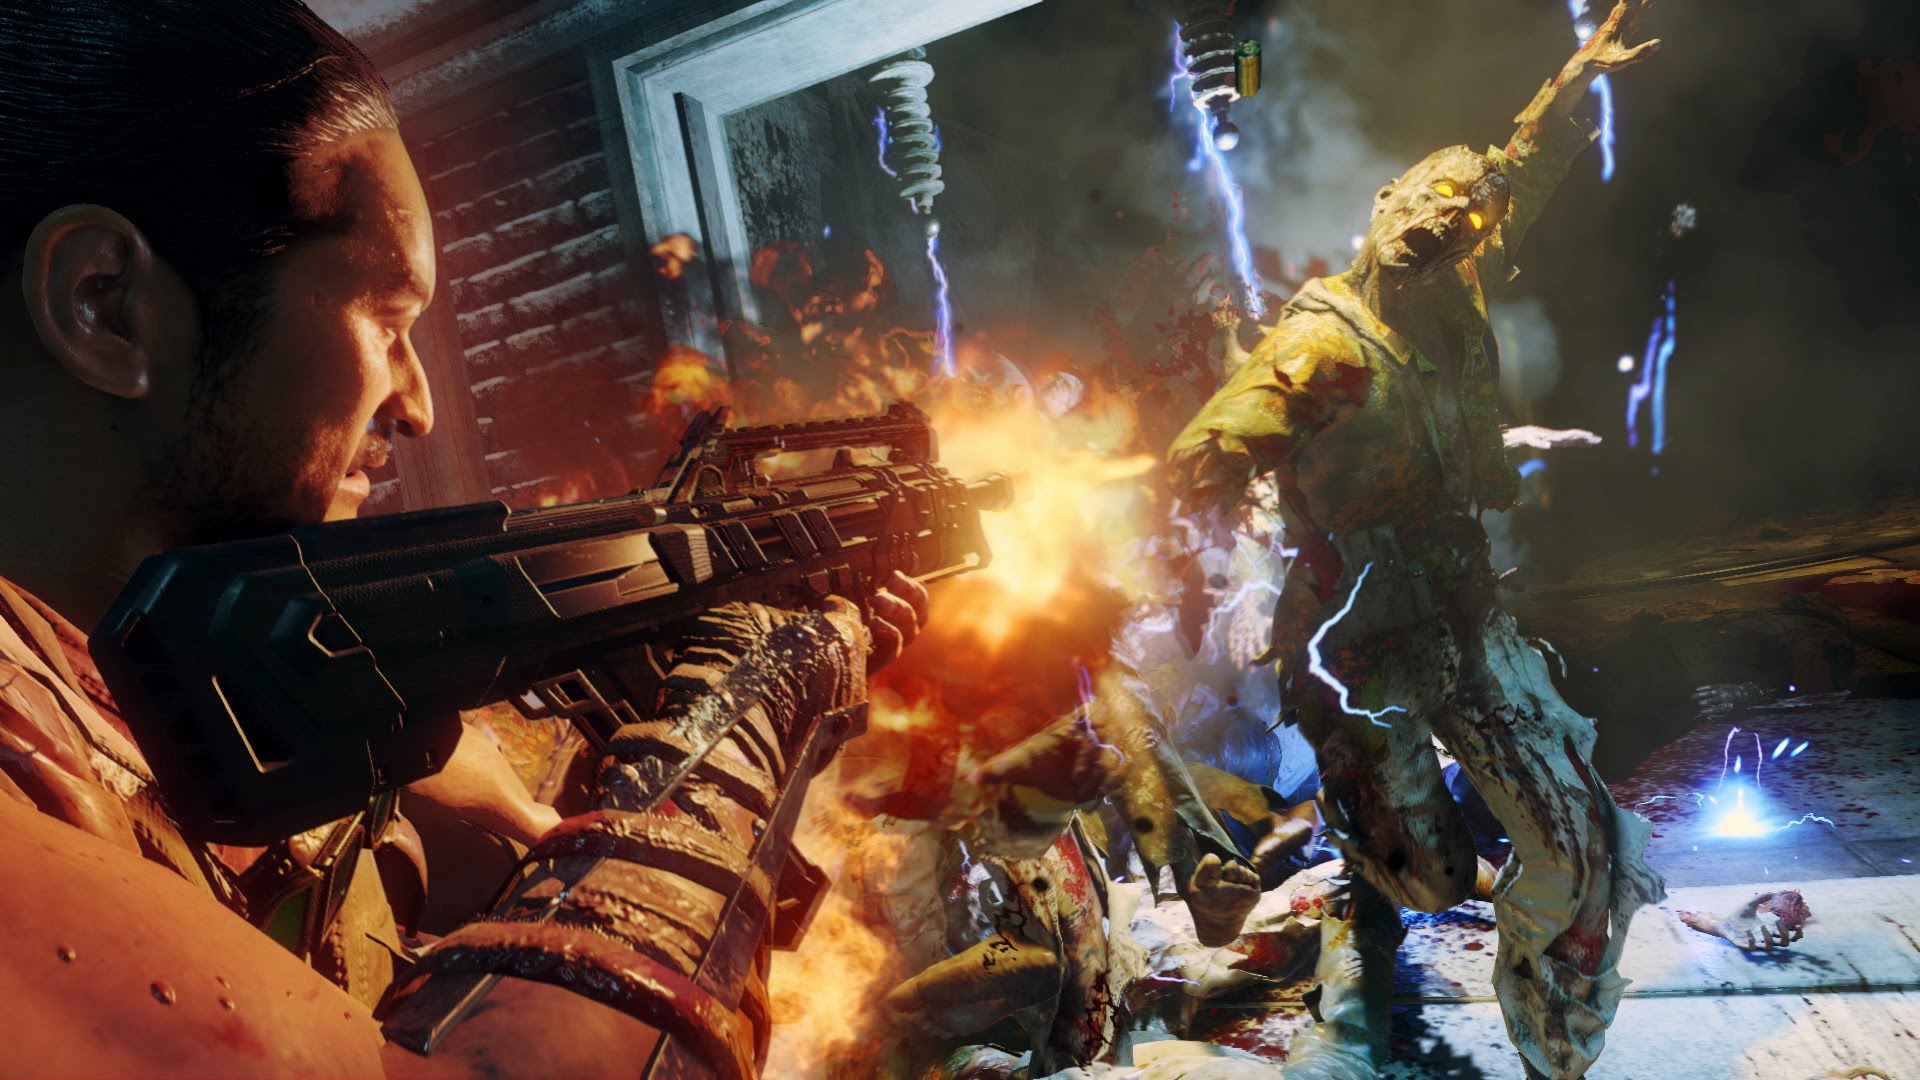 Call of Duty®: Black Ops III - "The Giant" Zombies Bonus Map Gameplay Trailer